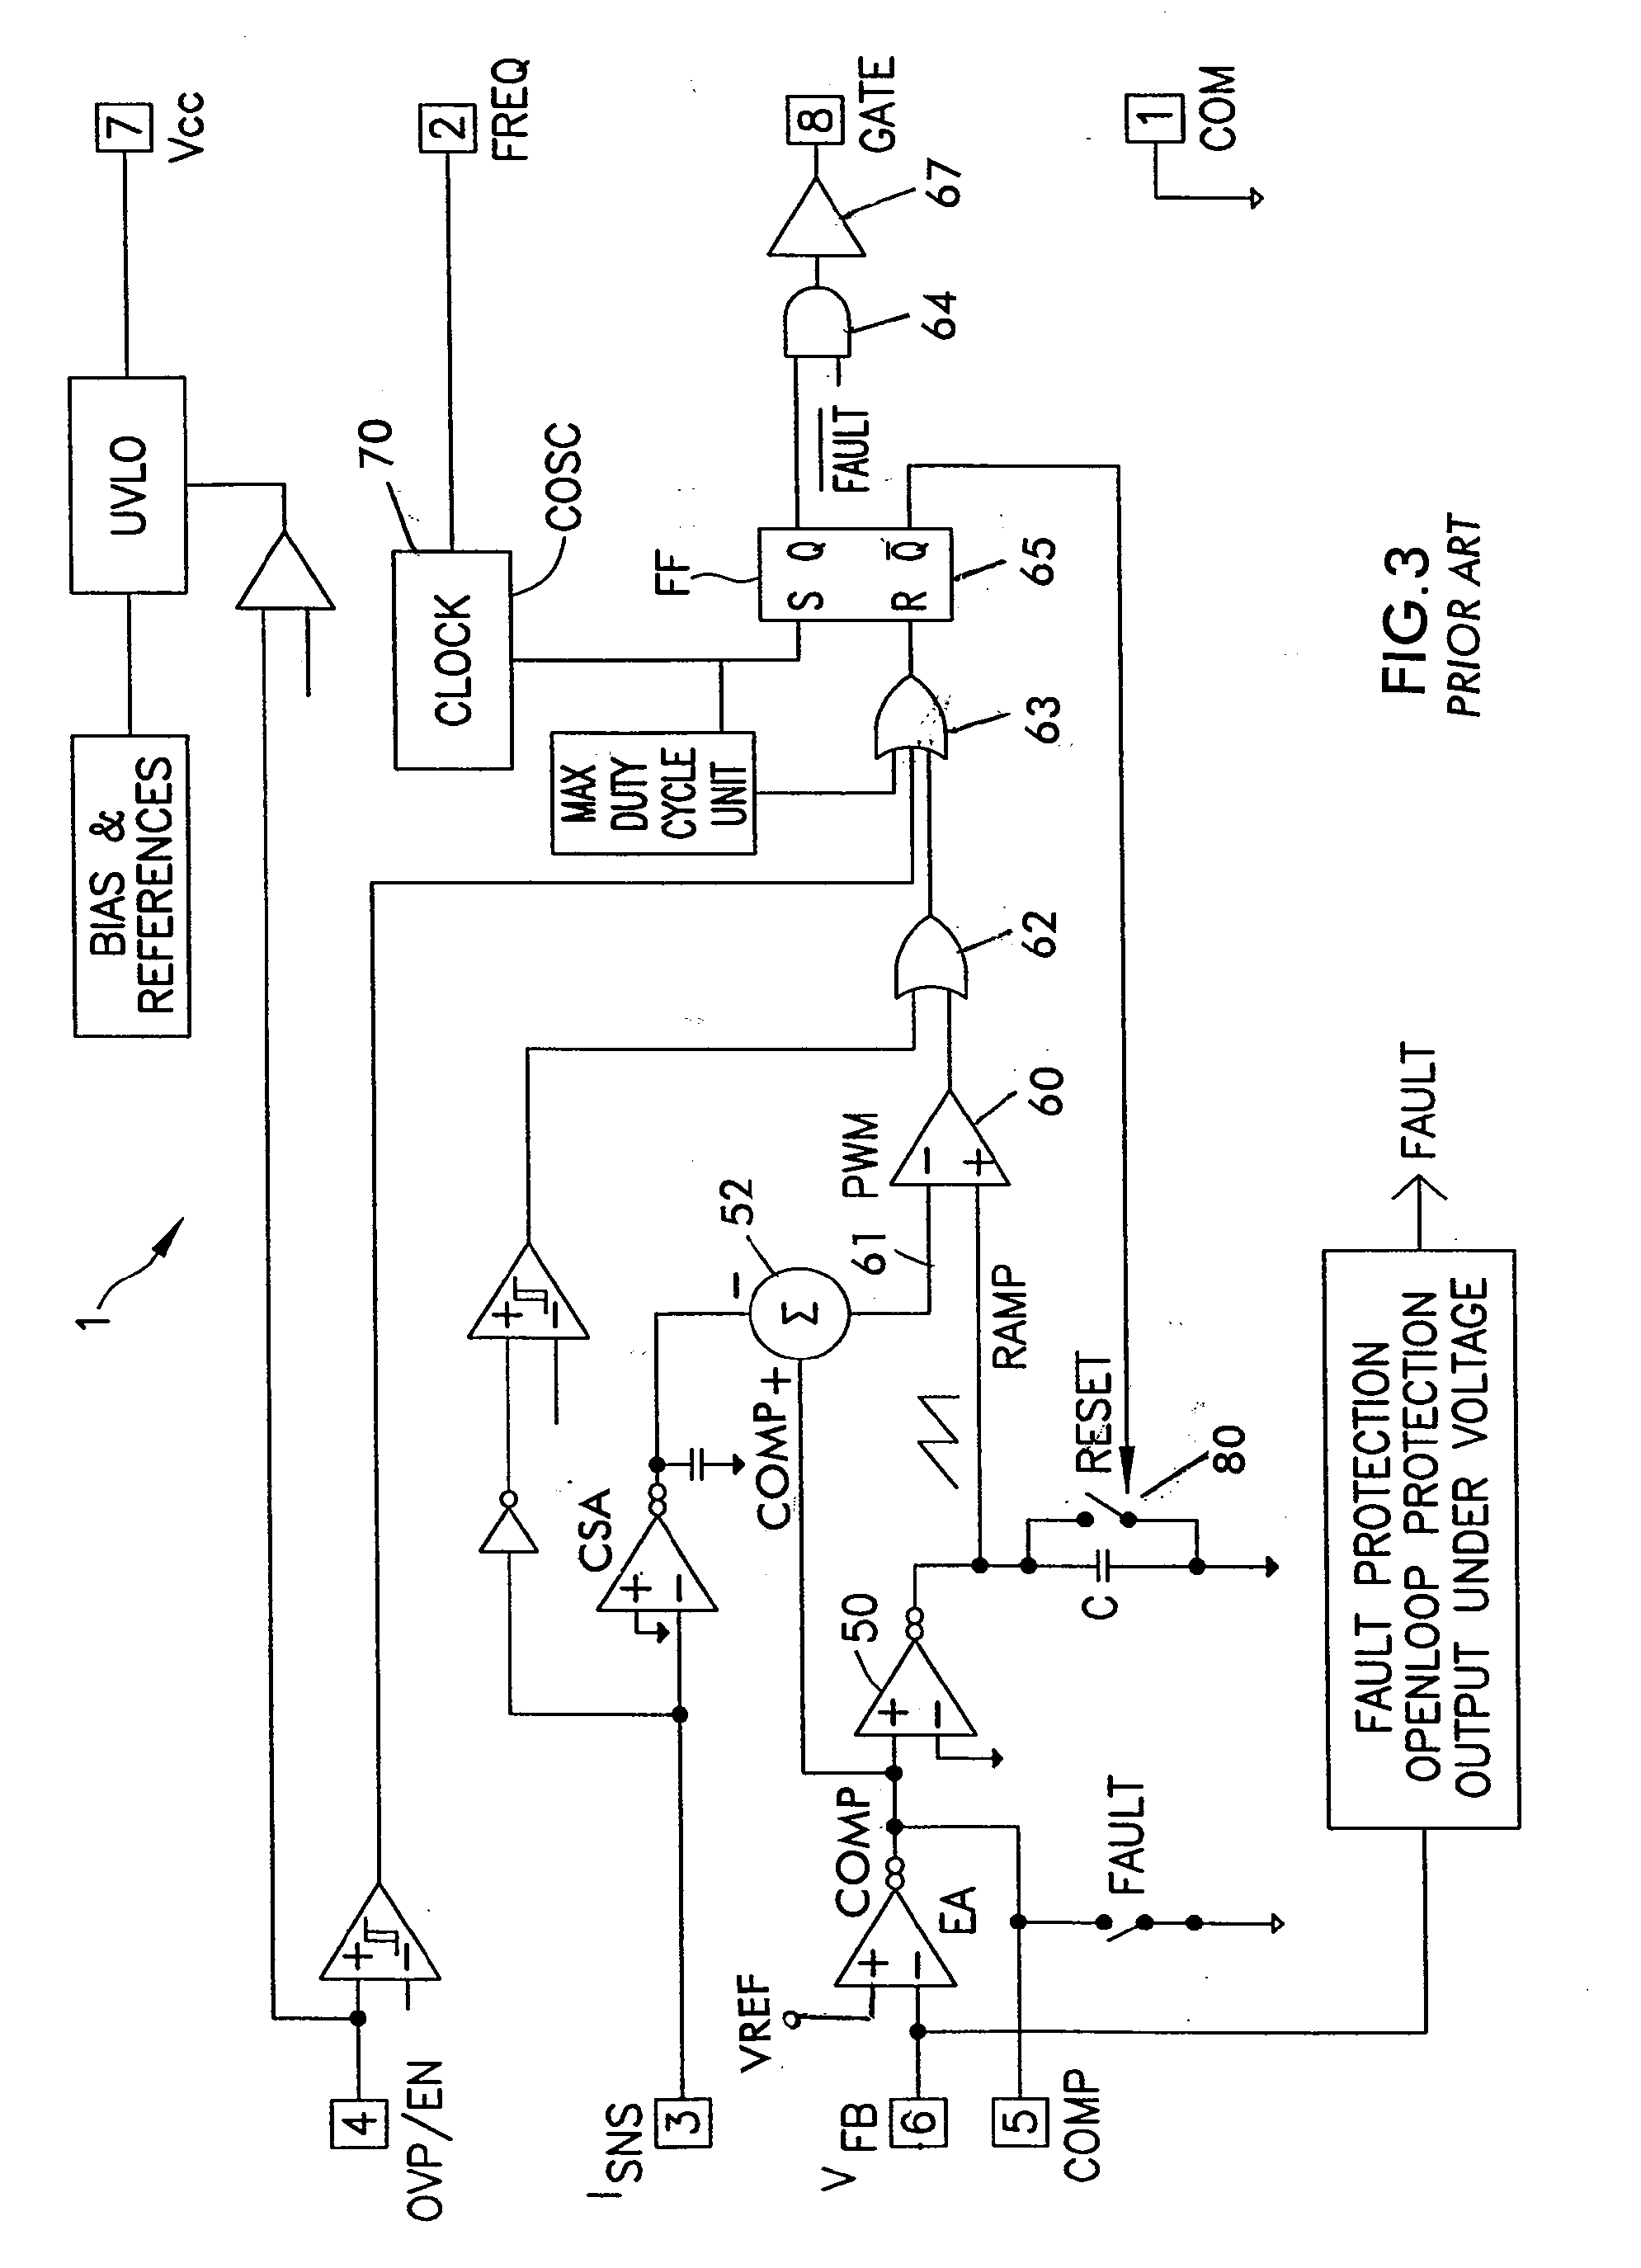 Merged ramp/oscillator for precise ramp control in one cycle pfc converter